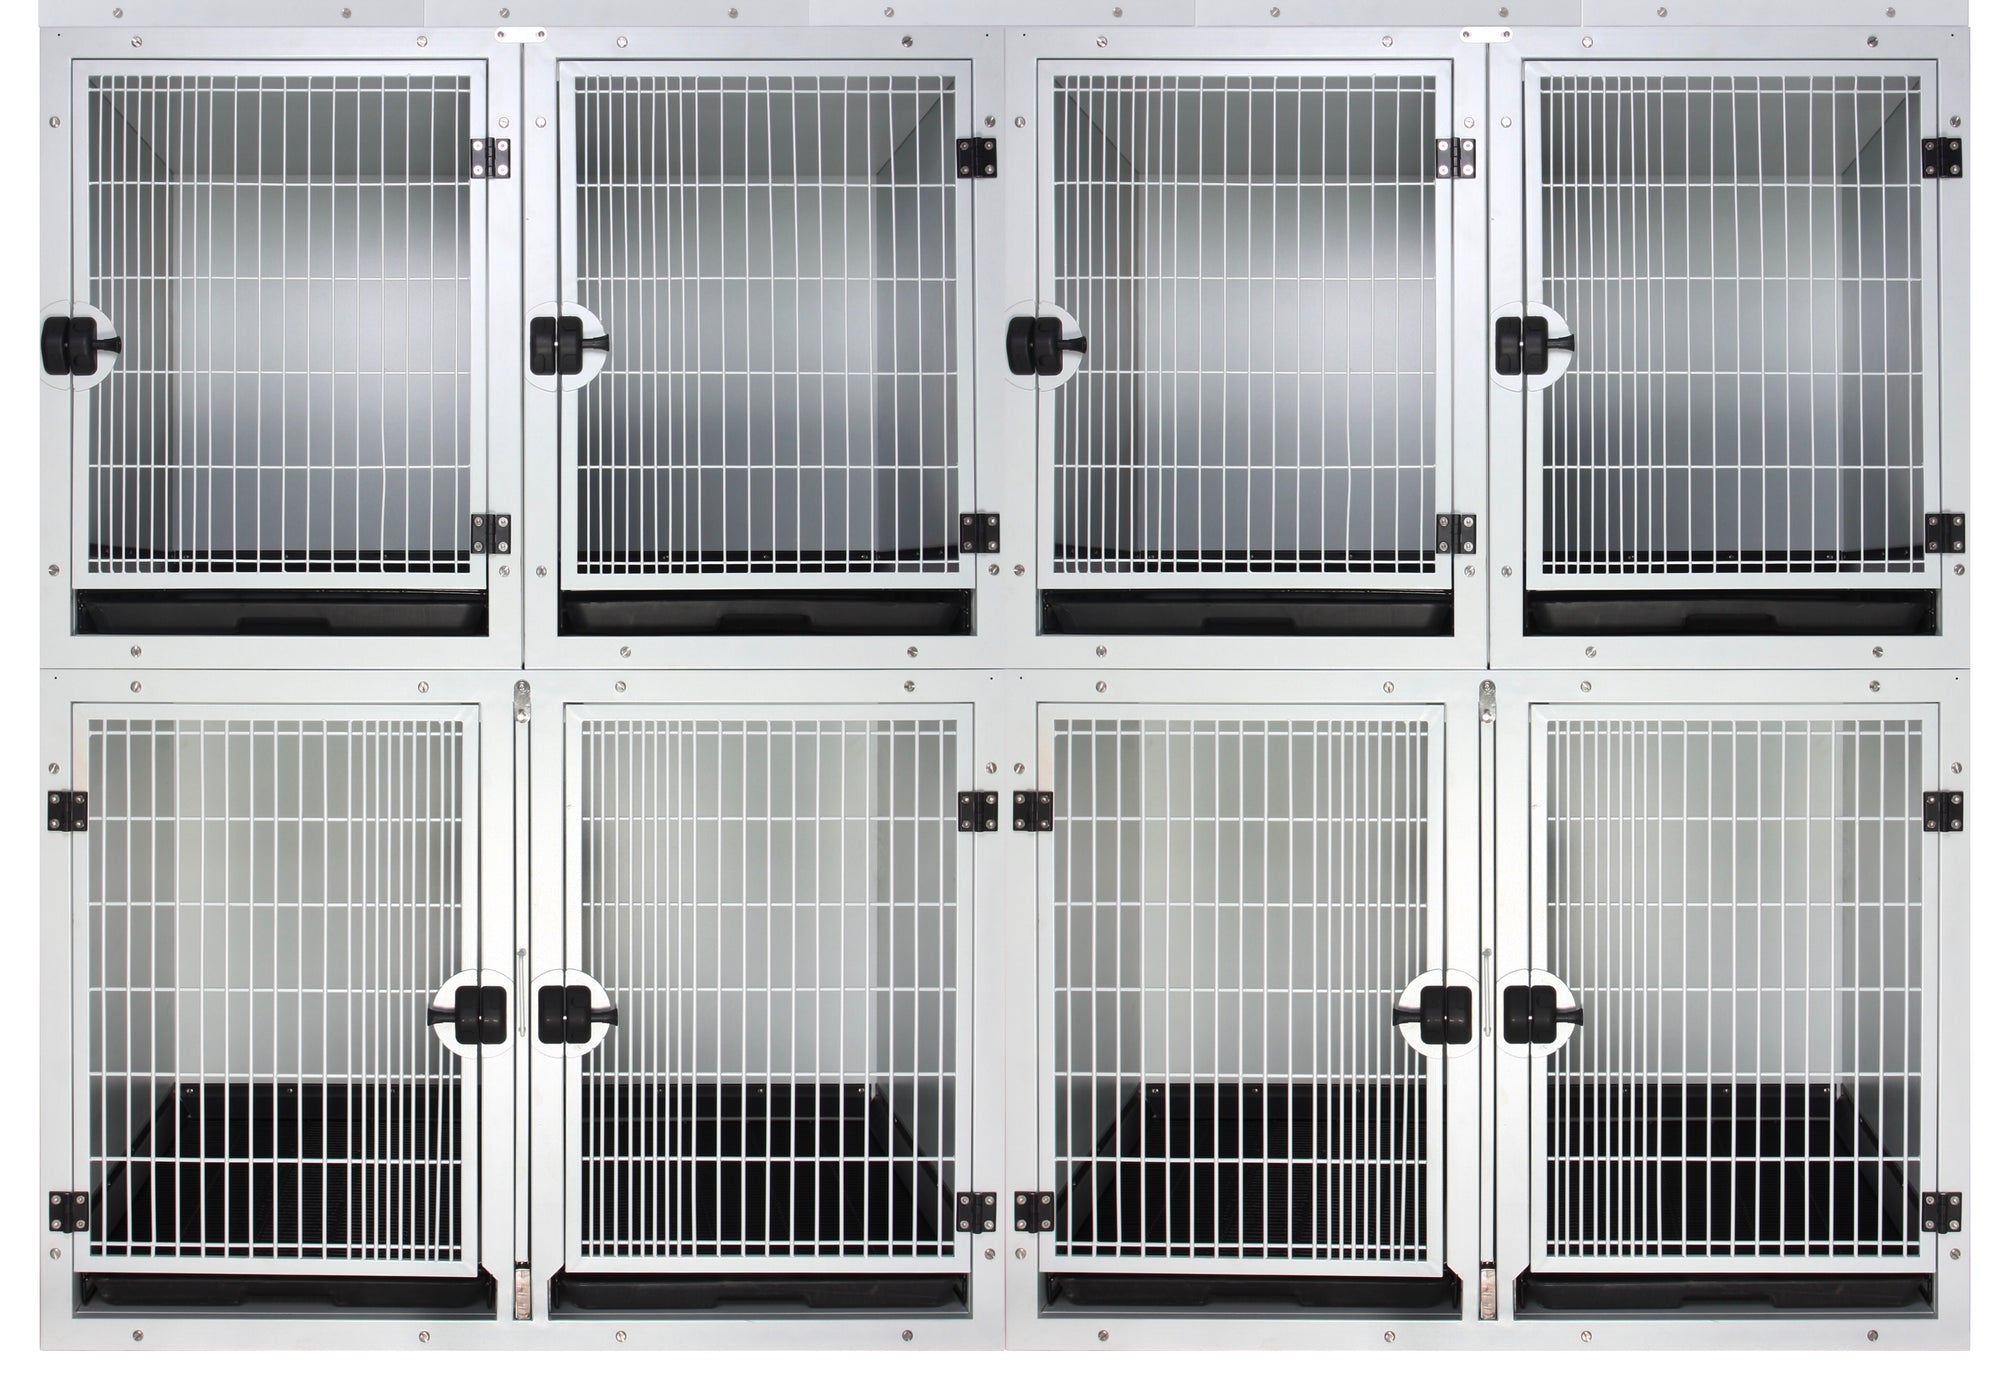 Professional Modular Cage with Solid Walls